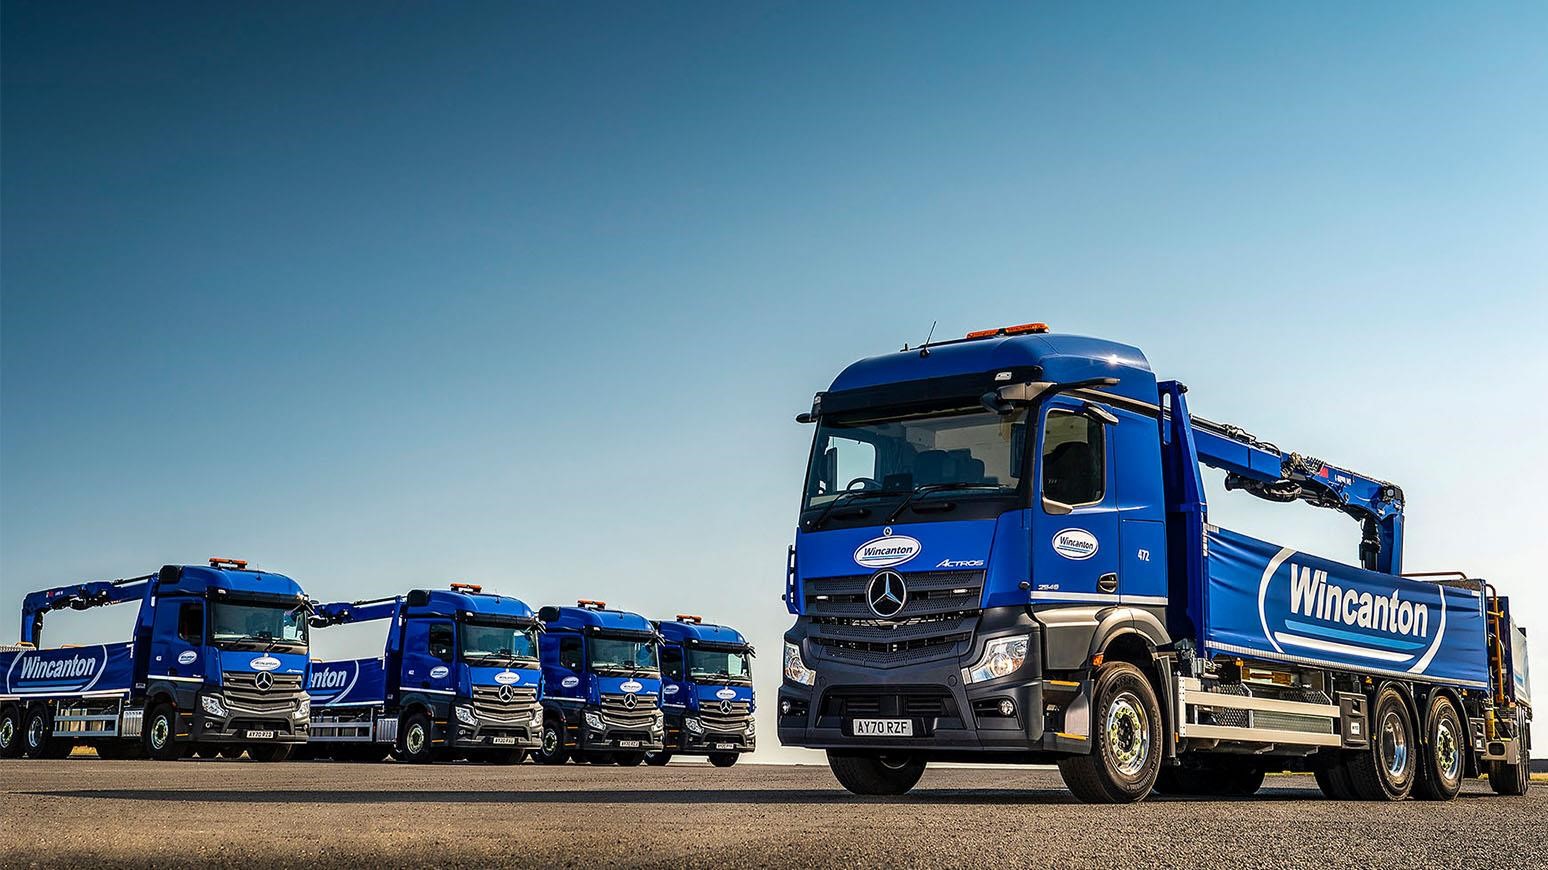 Logistics Firm Wincanton Leverages Safety & Long-Haulage Abilities Of New Fifth-Generation Mercedes-Benz Actros